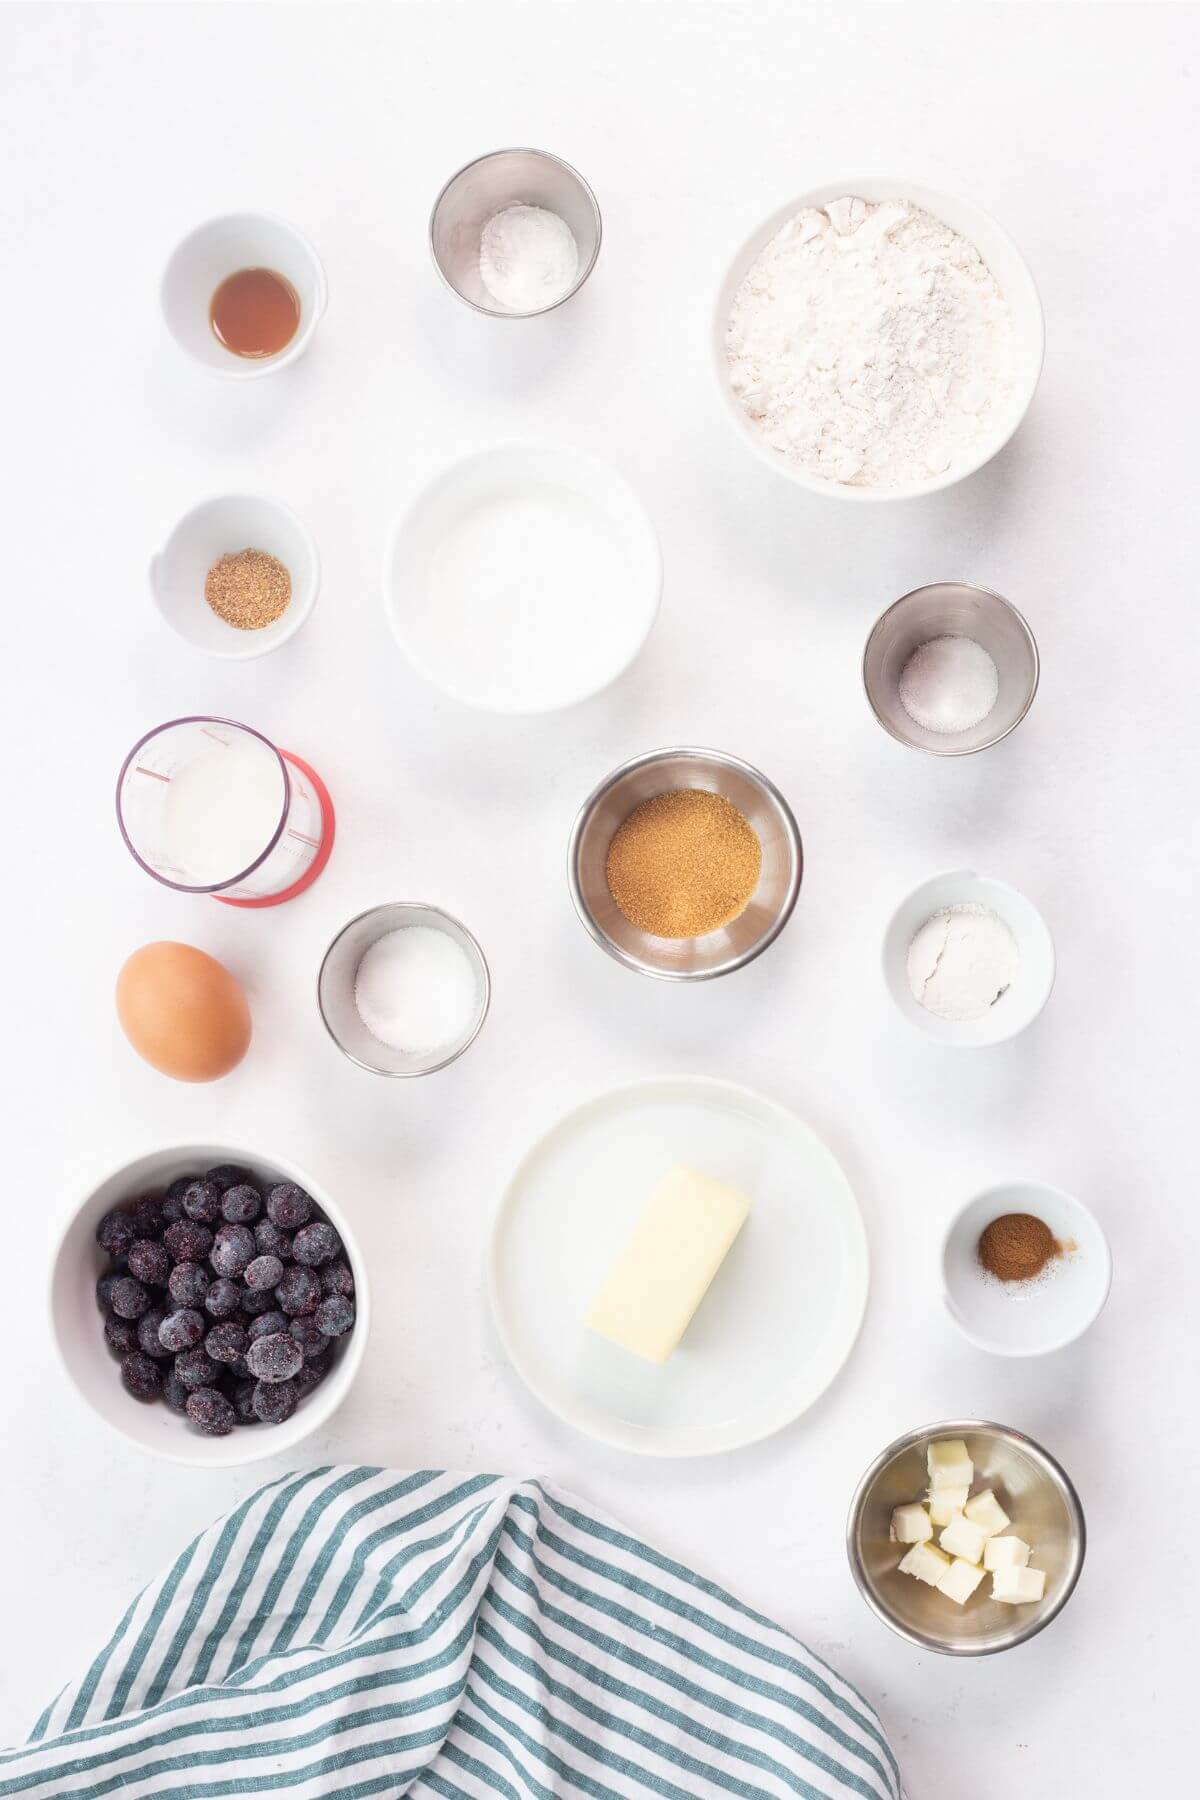 Ingredients for small-batch blueberry muffins.